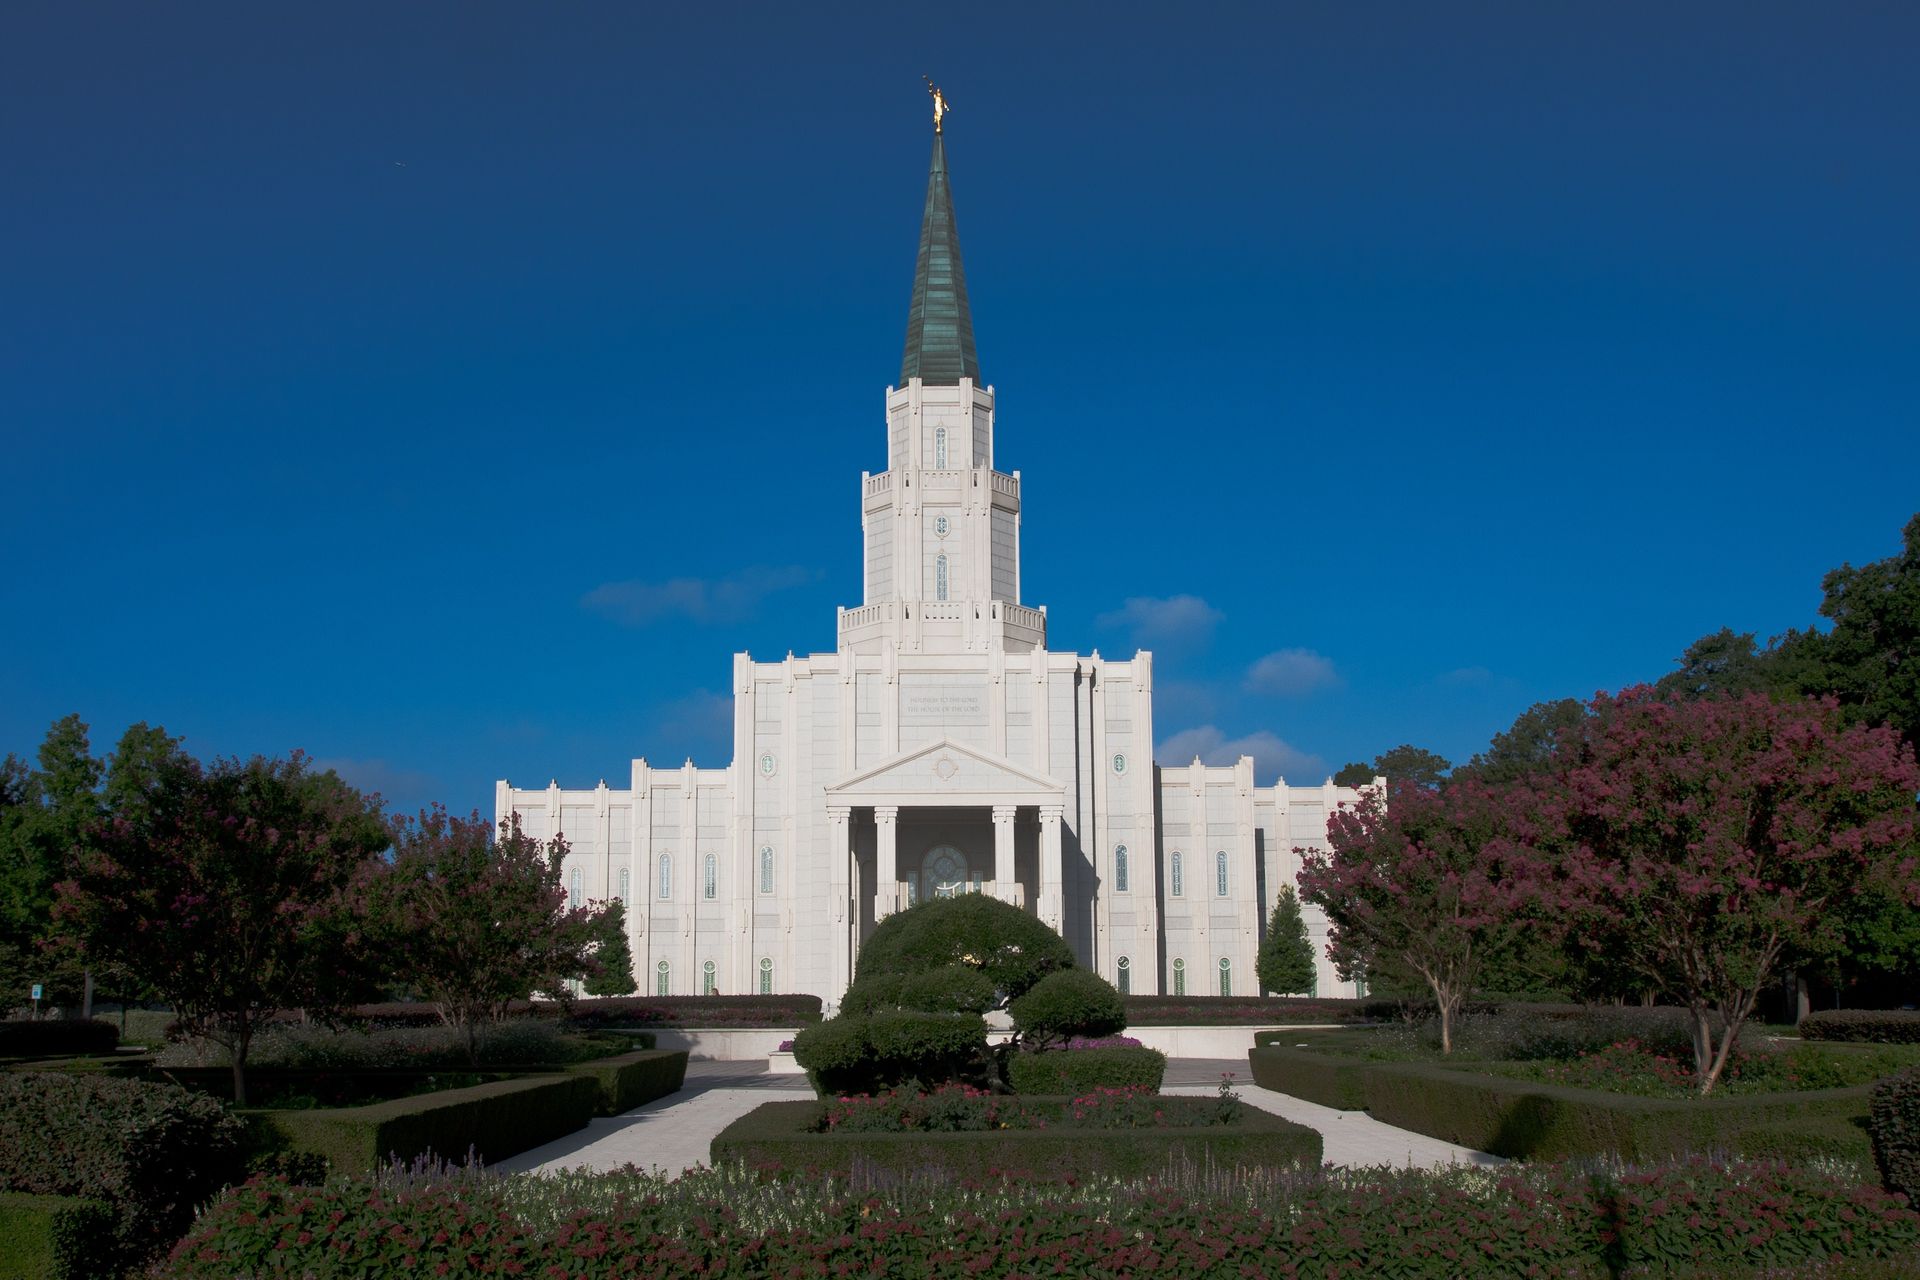 The Houston Texas Temple and grounds in the daytime.